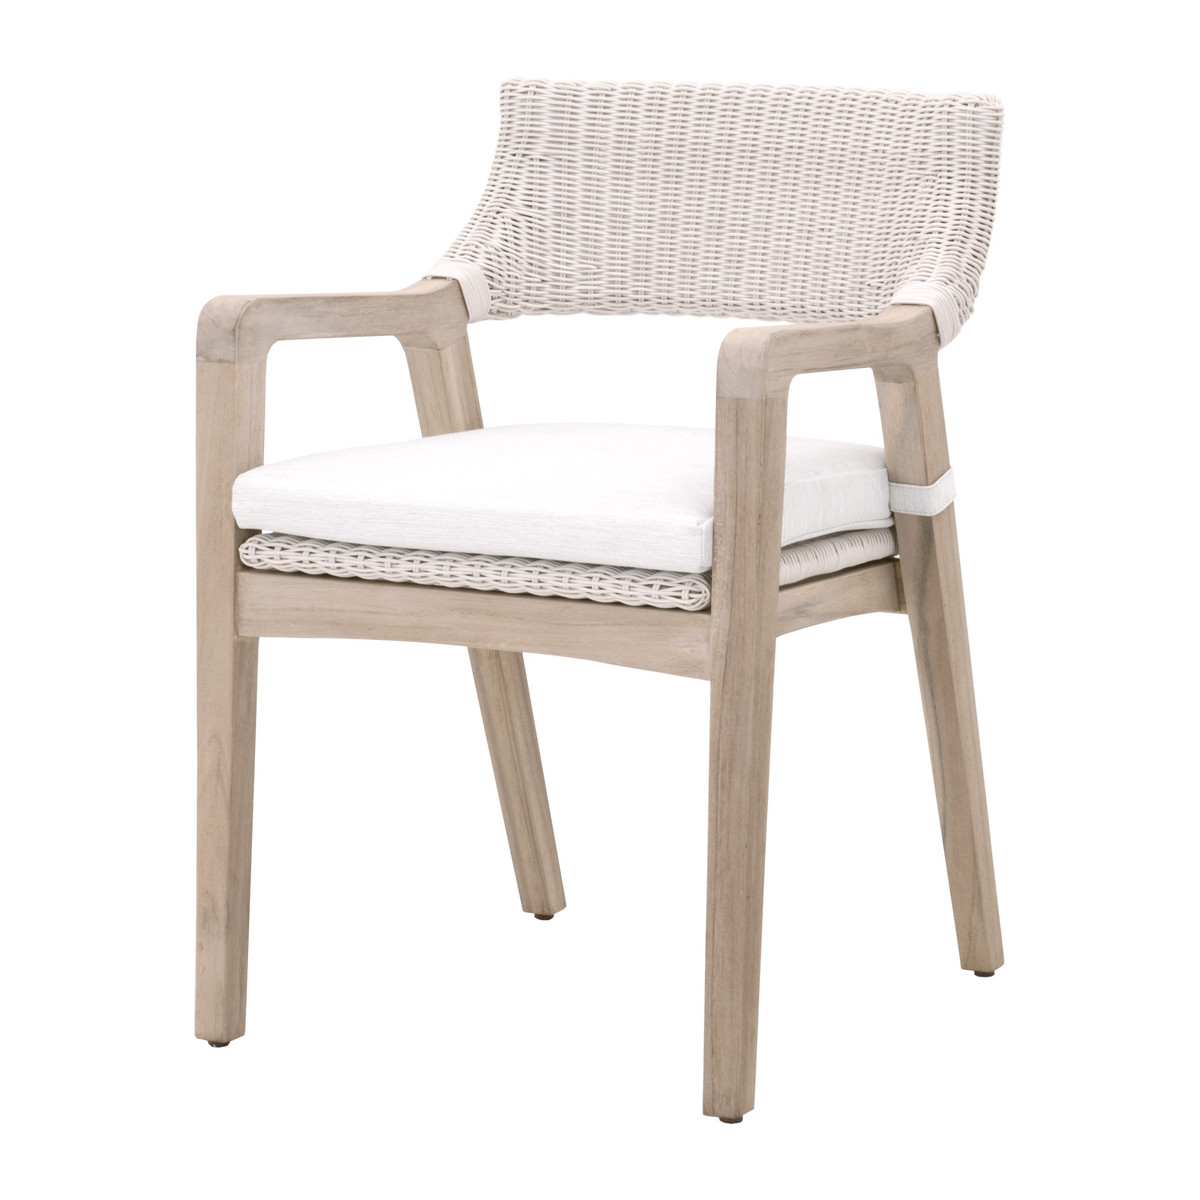 Lucia Outdoor Arm Chair, Pure White Wicker & Gray Teak - Image 0